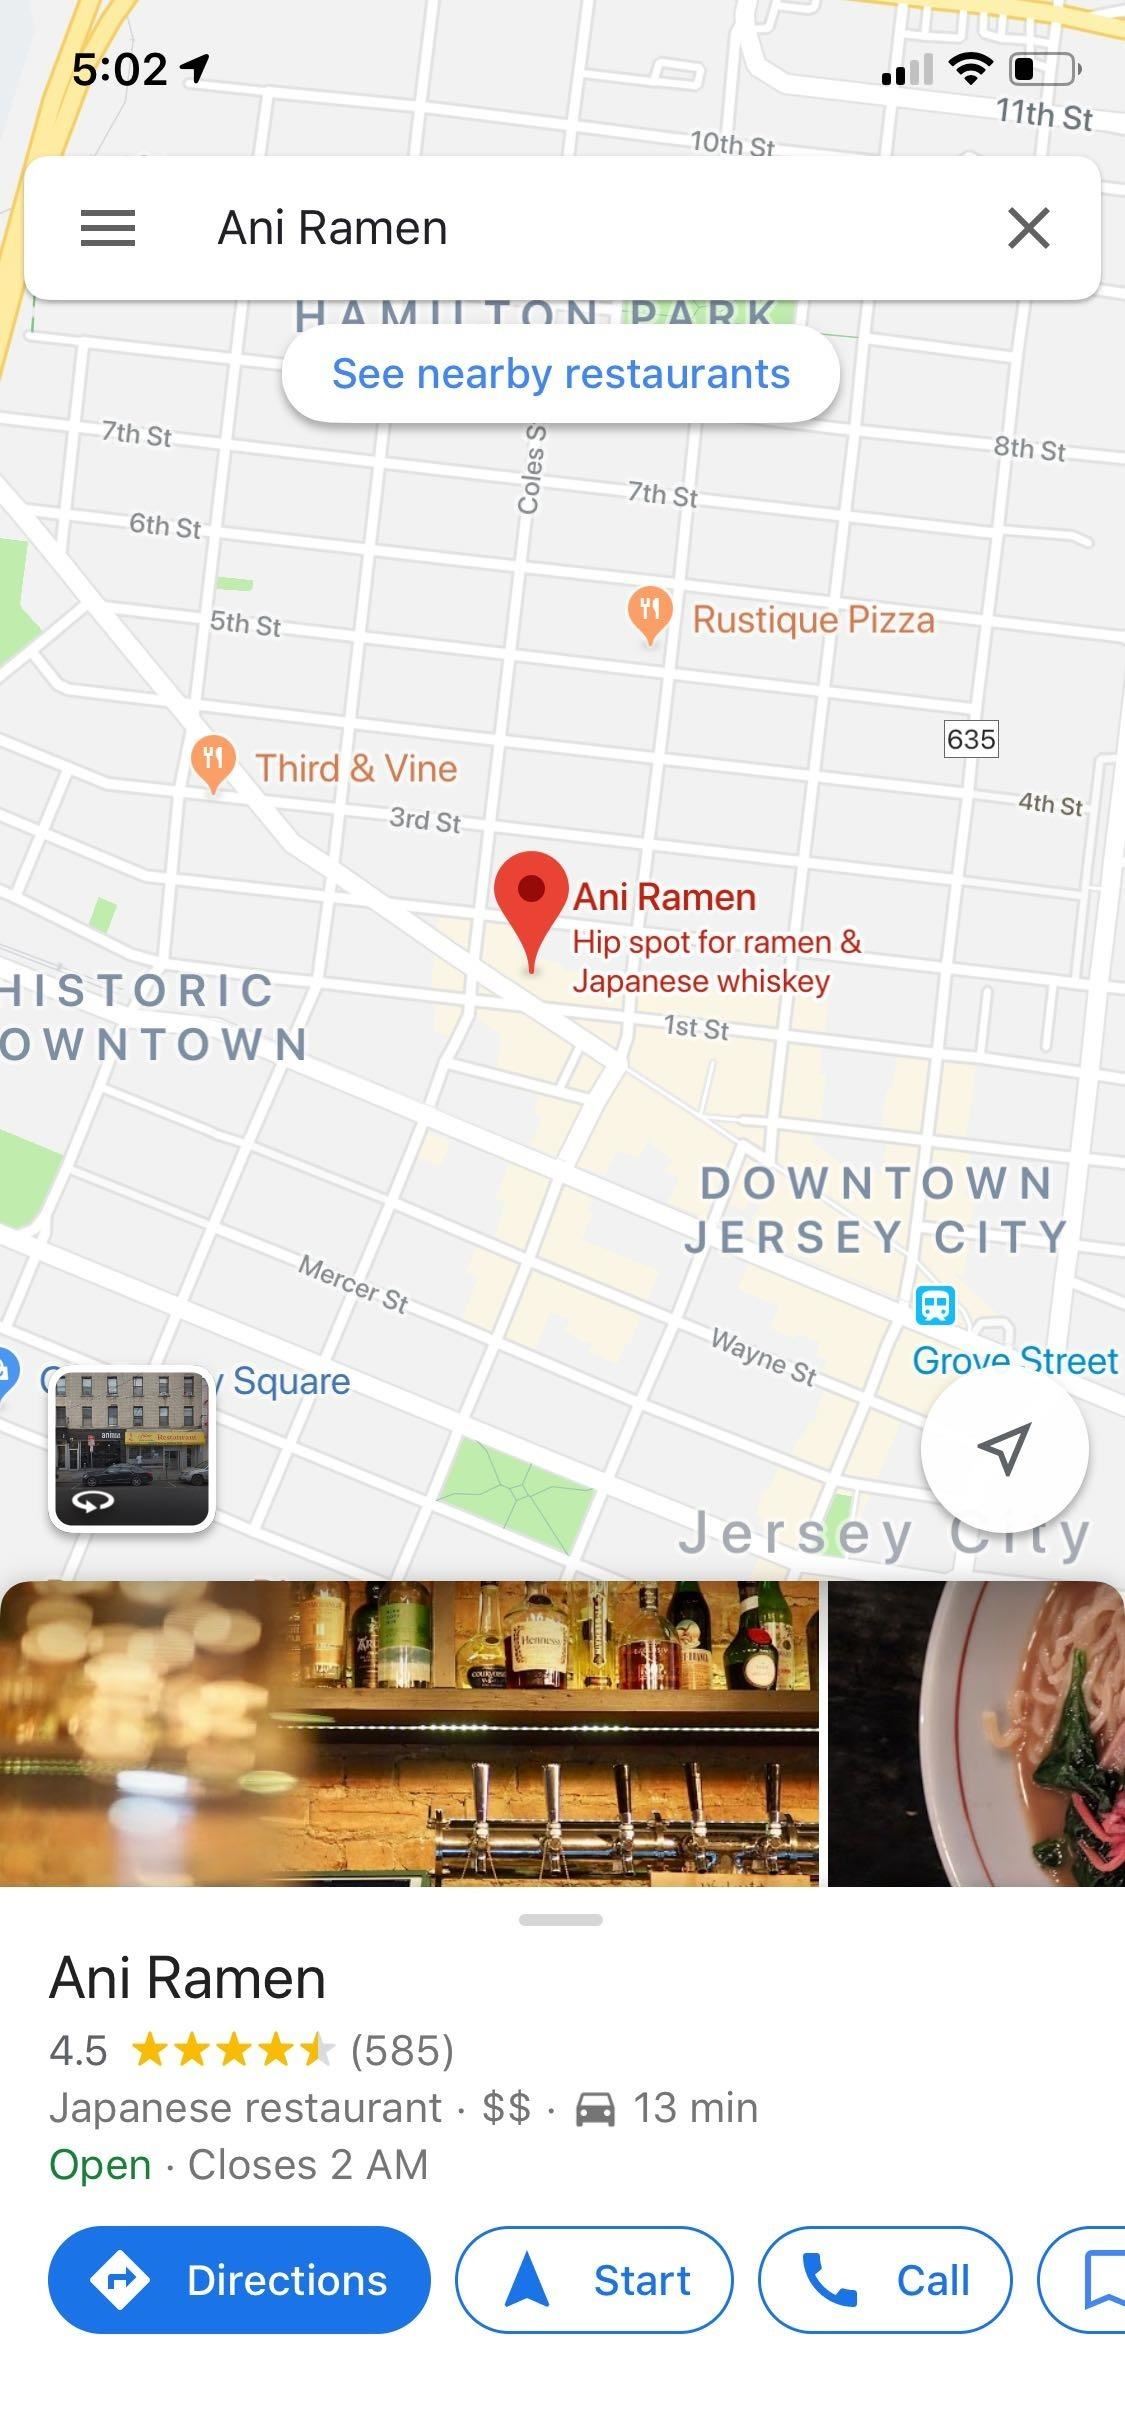 How to See Live & Average Wait Times for Your Favorite Restaurants in Google Maps